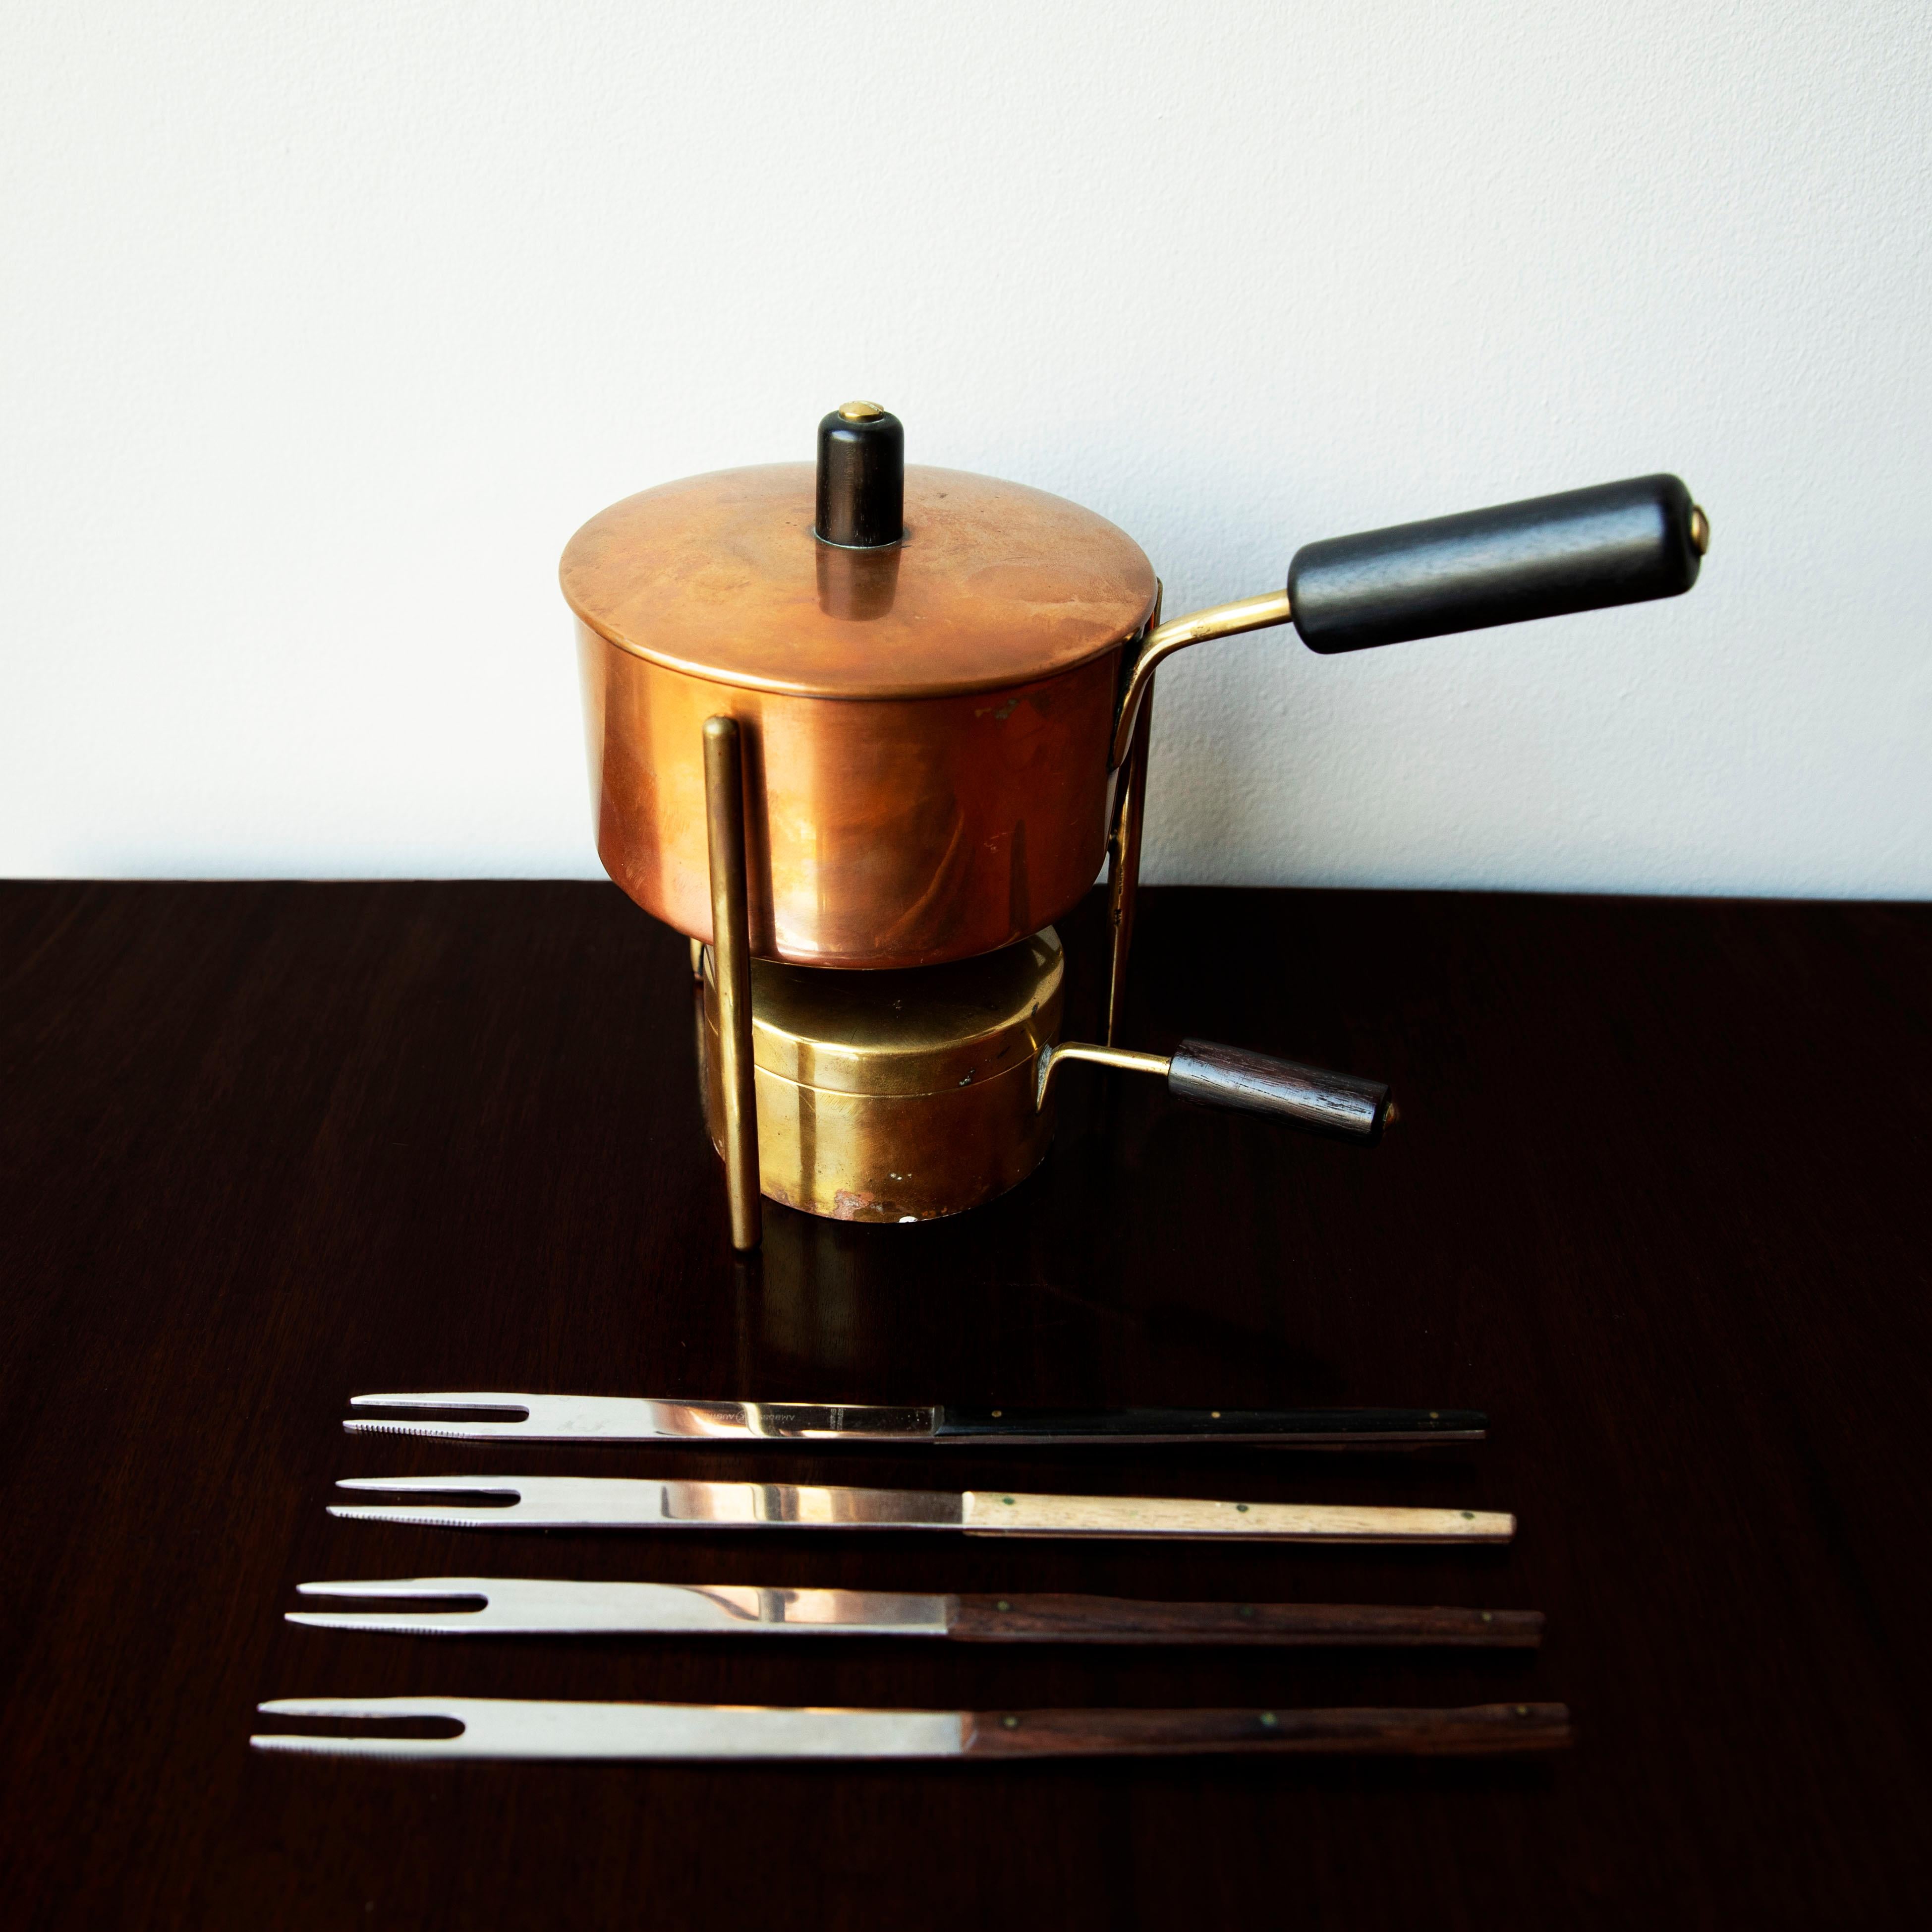 Vintage fondue pot and burner by Carl Auböck II, Vienna, circa 1950.
The pot and its lid are made out of spun tinned copper, while the burner is spun brass. The pot, its lid and the burner, all have brass handles with ebony grips.
The sculptural